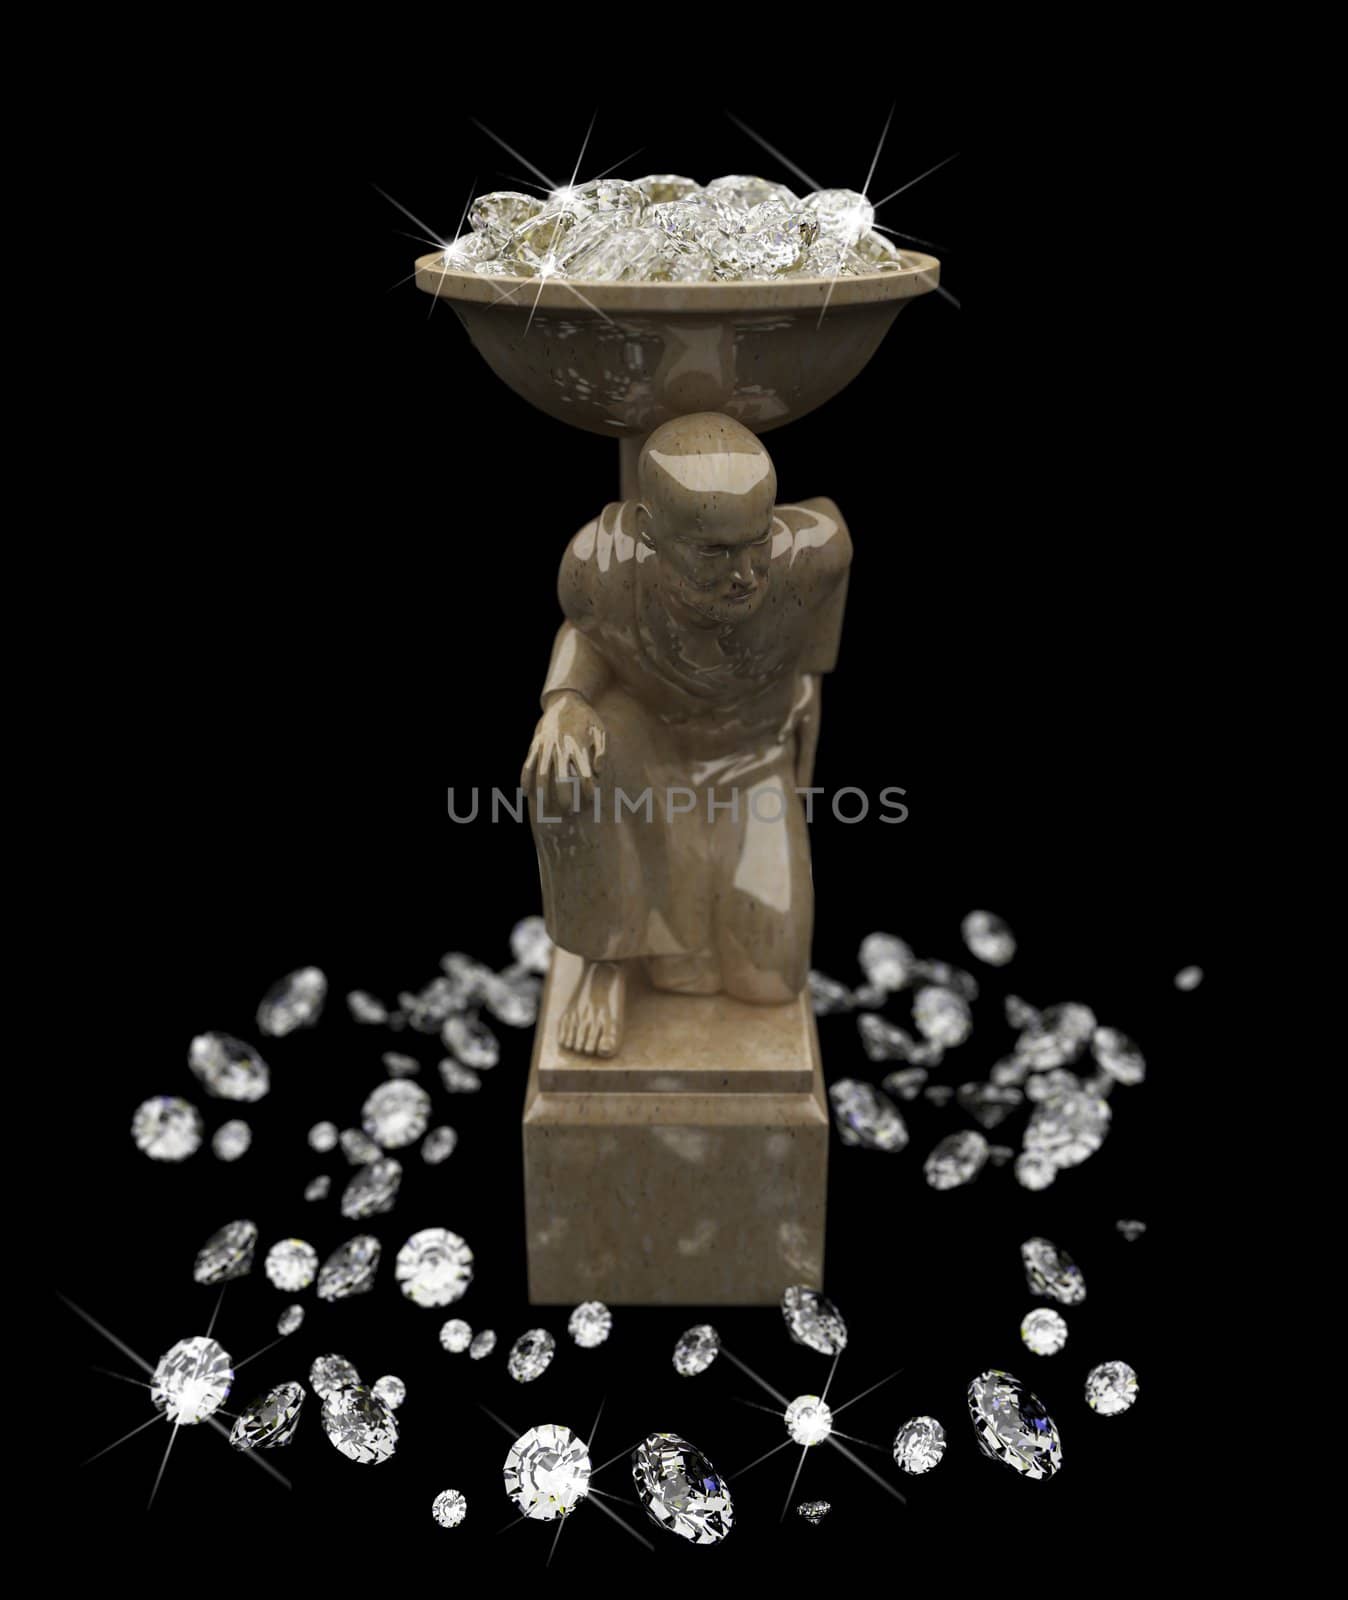 a lot of diamonds and marble statuette made in 3D